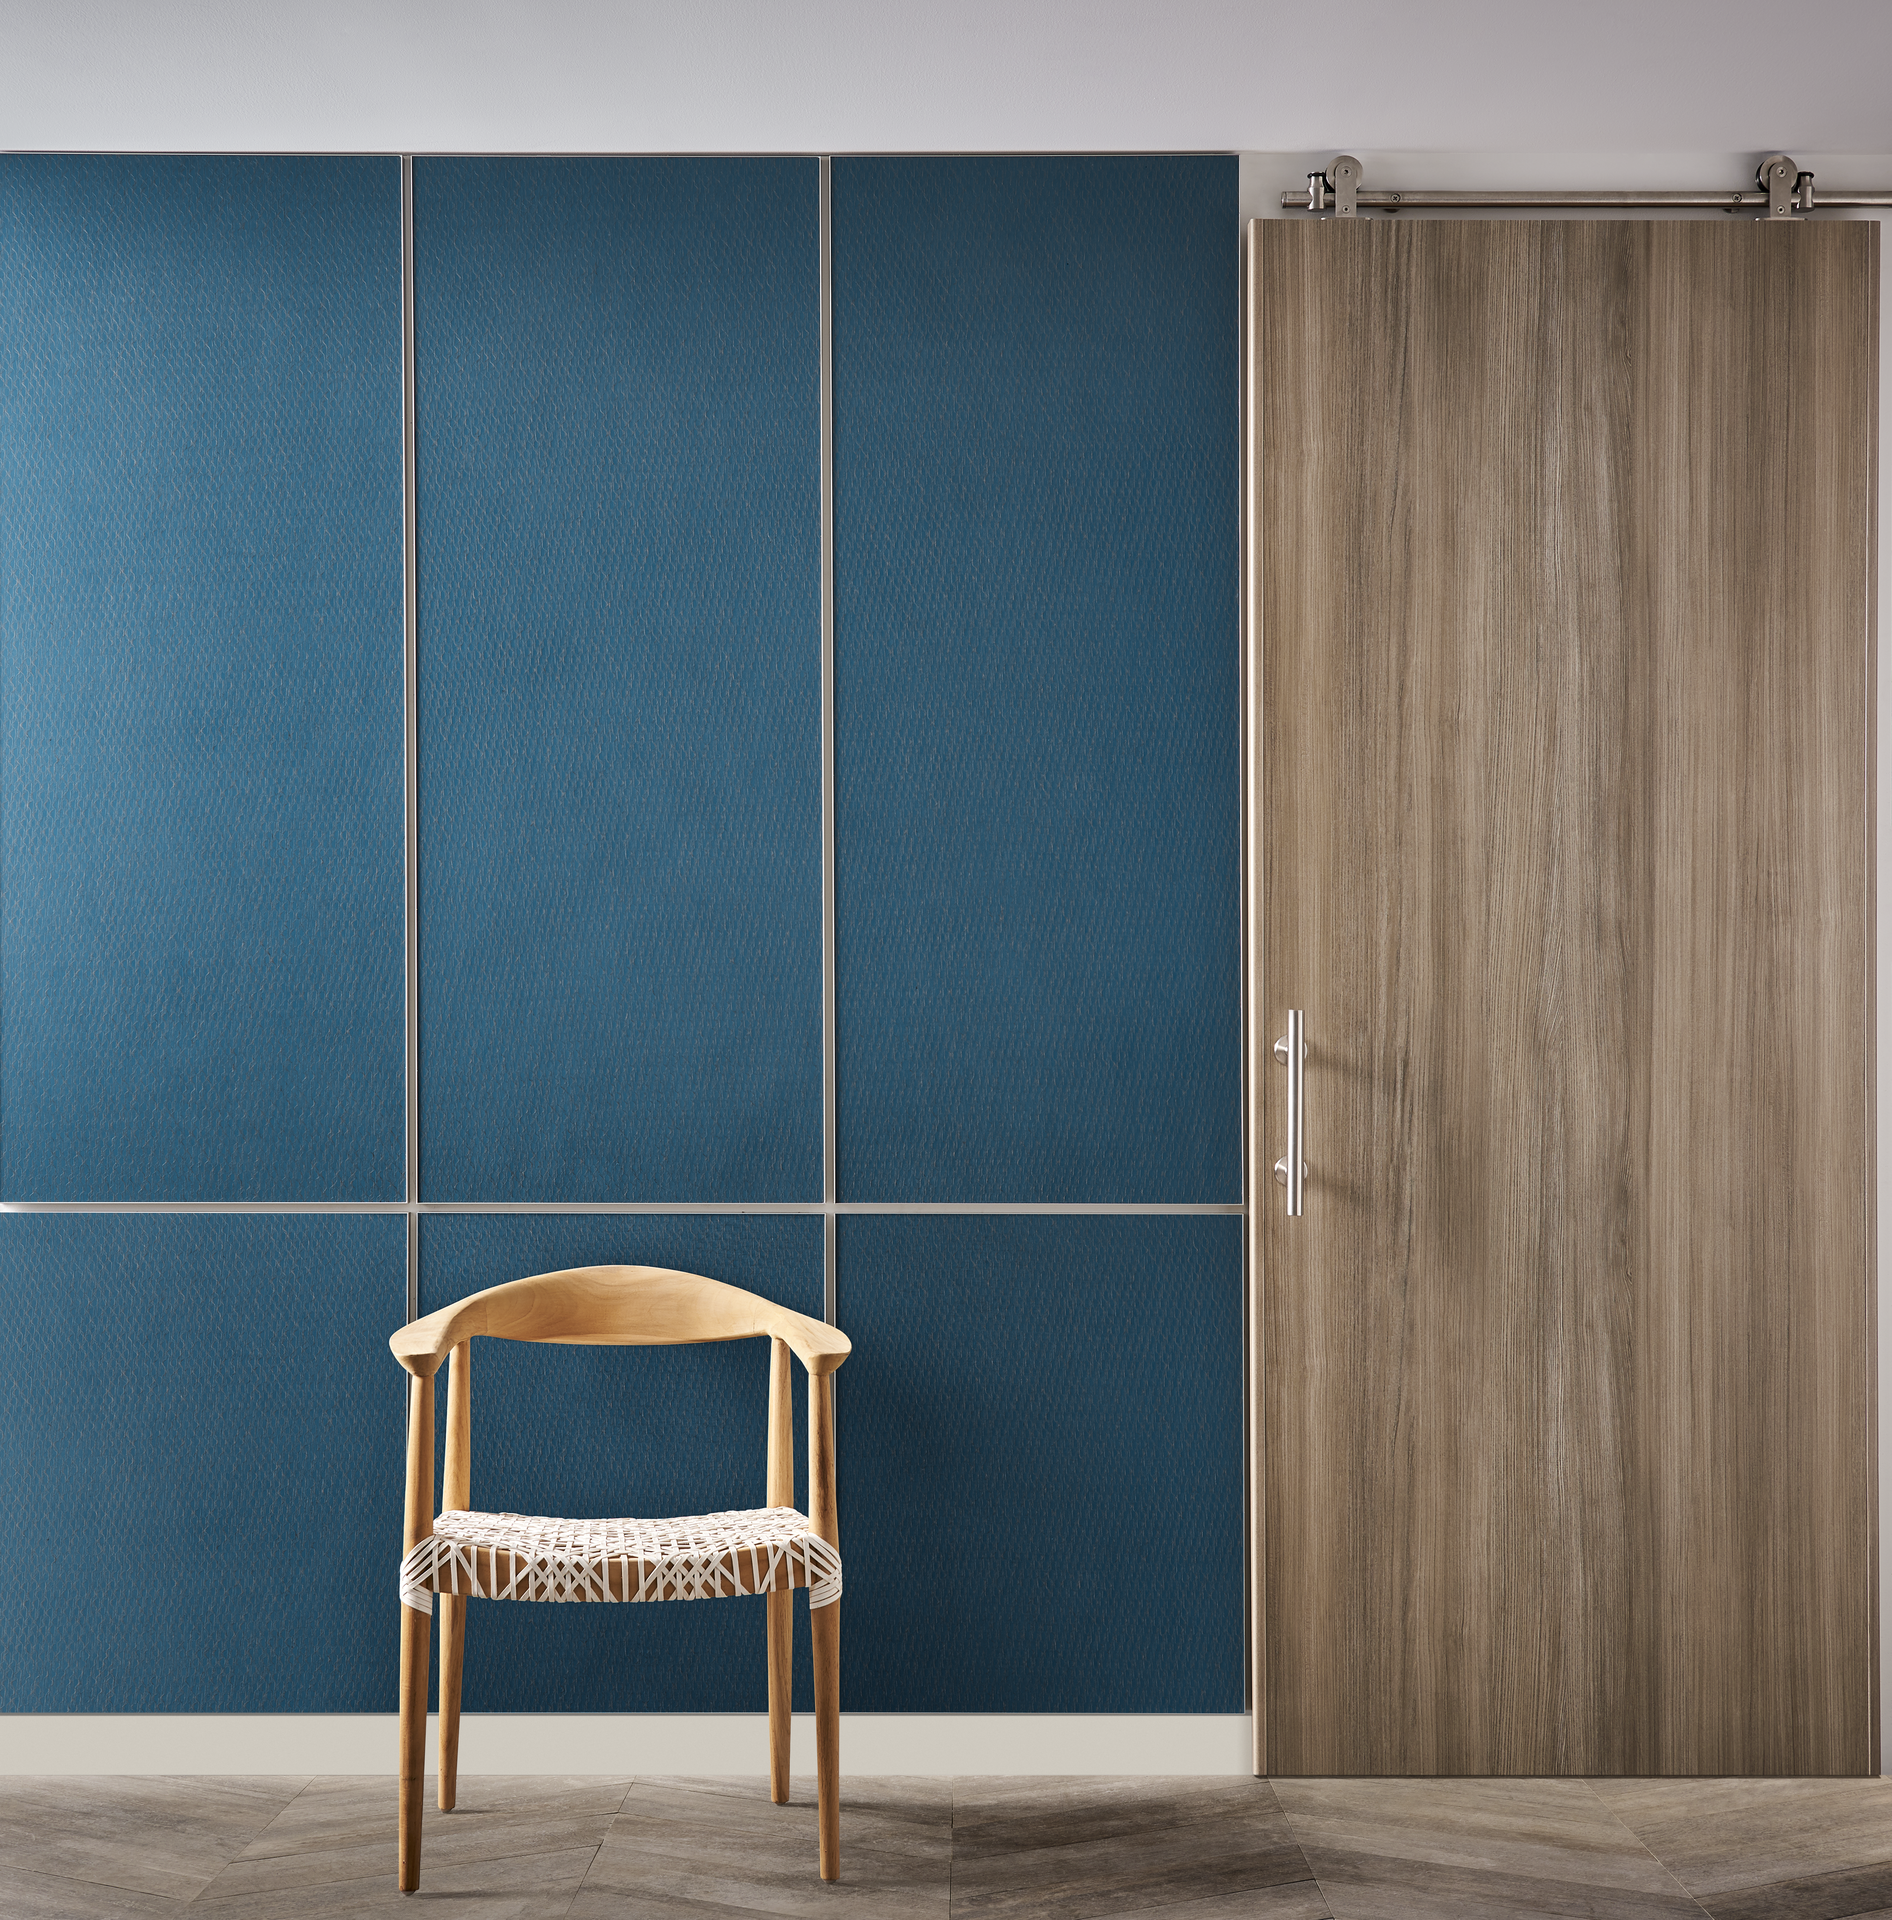 Acrovyn wall panel with chair and Acrovyn door